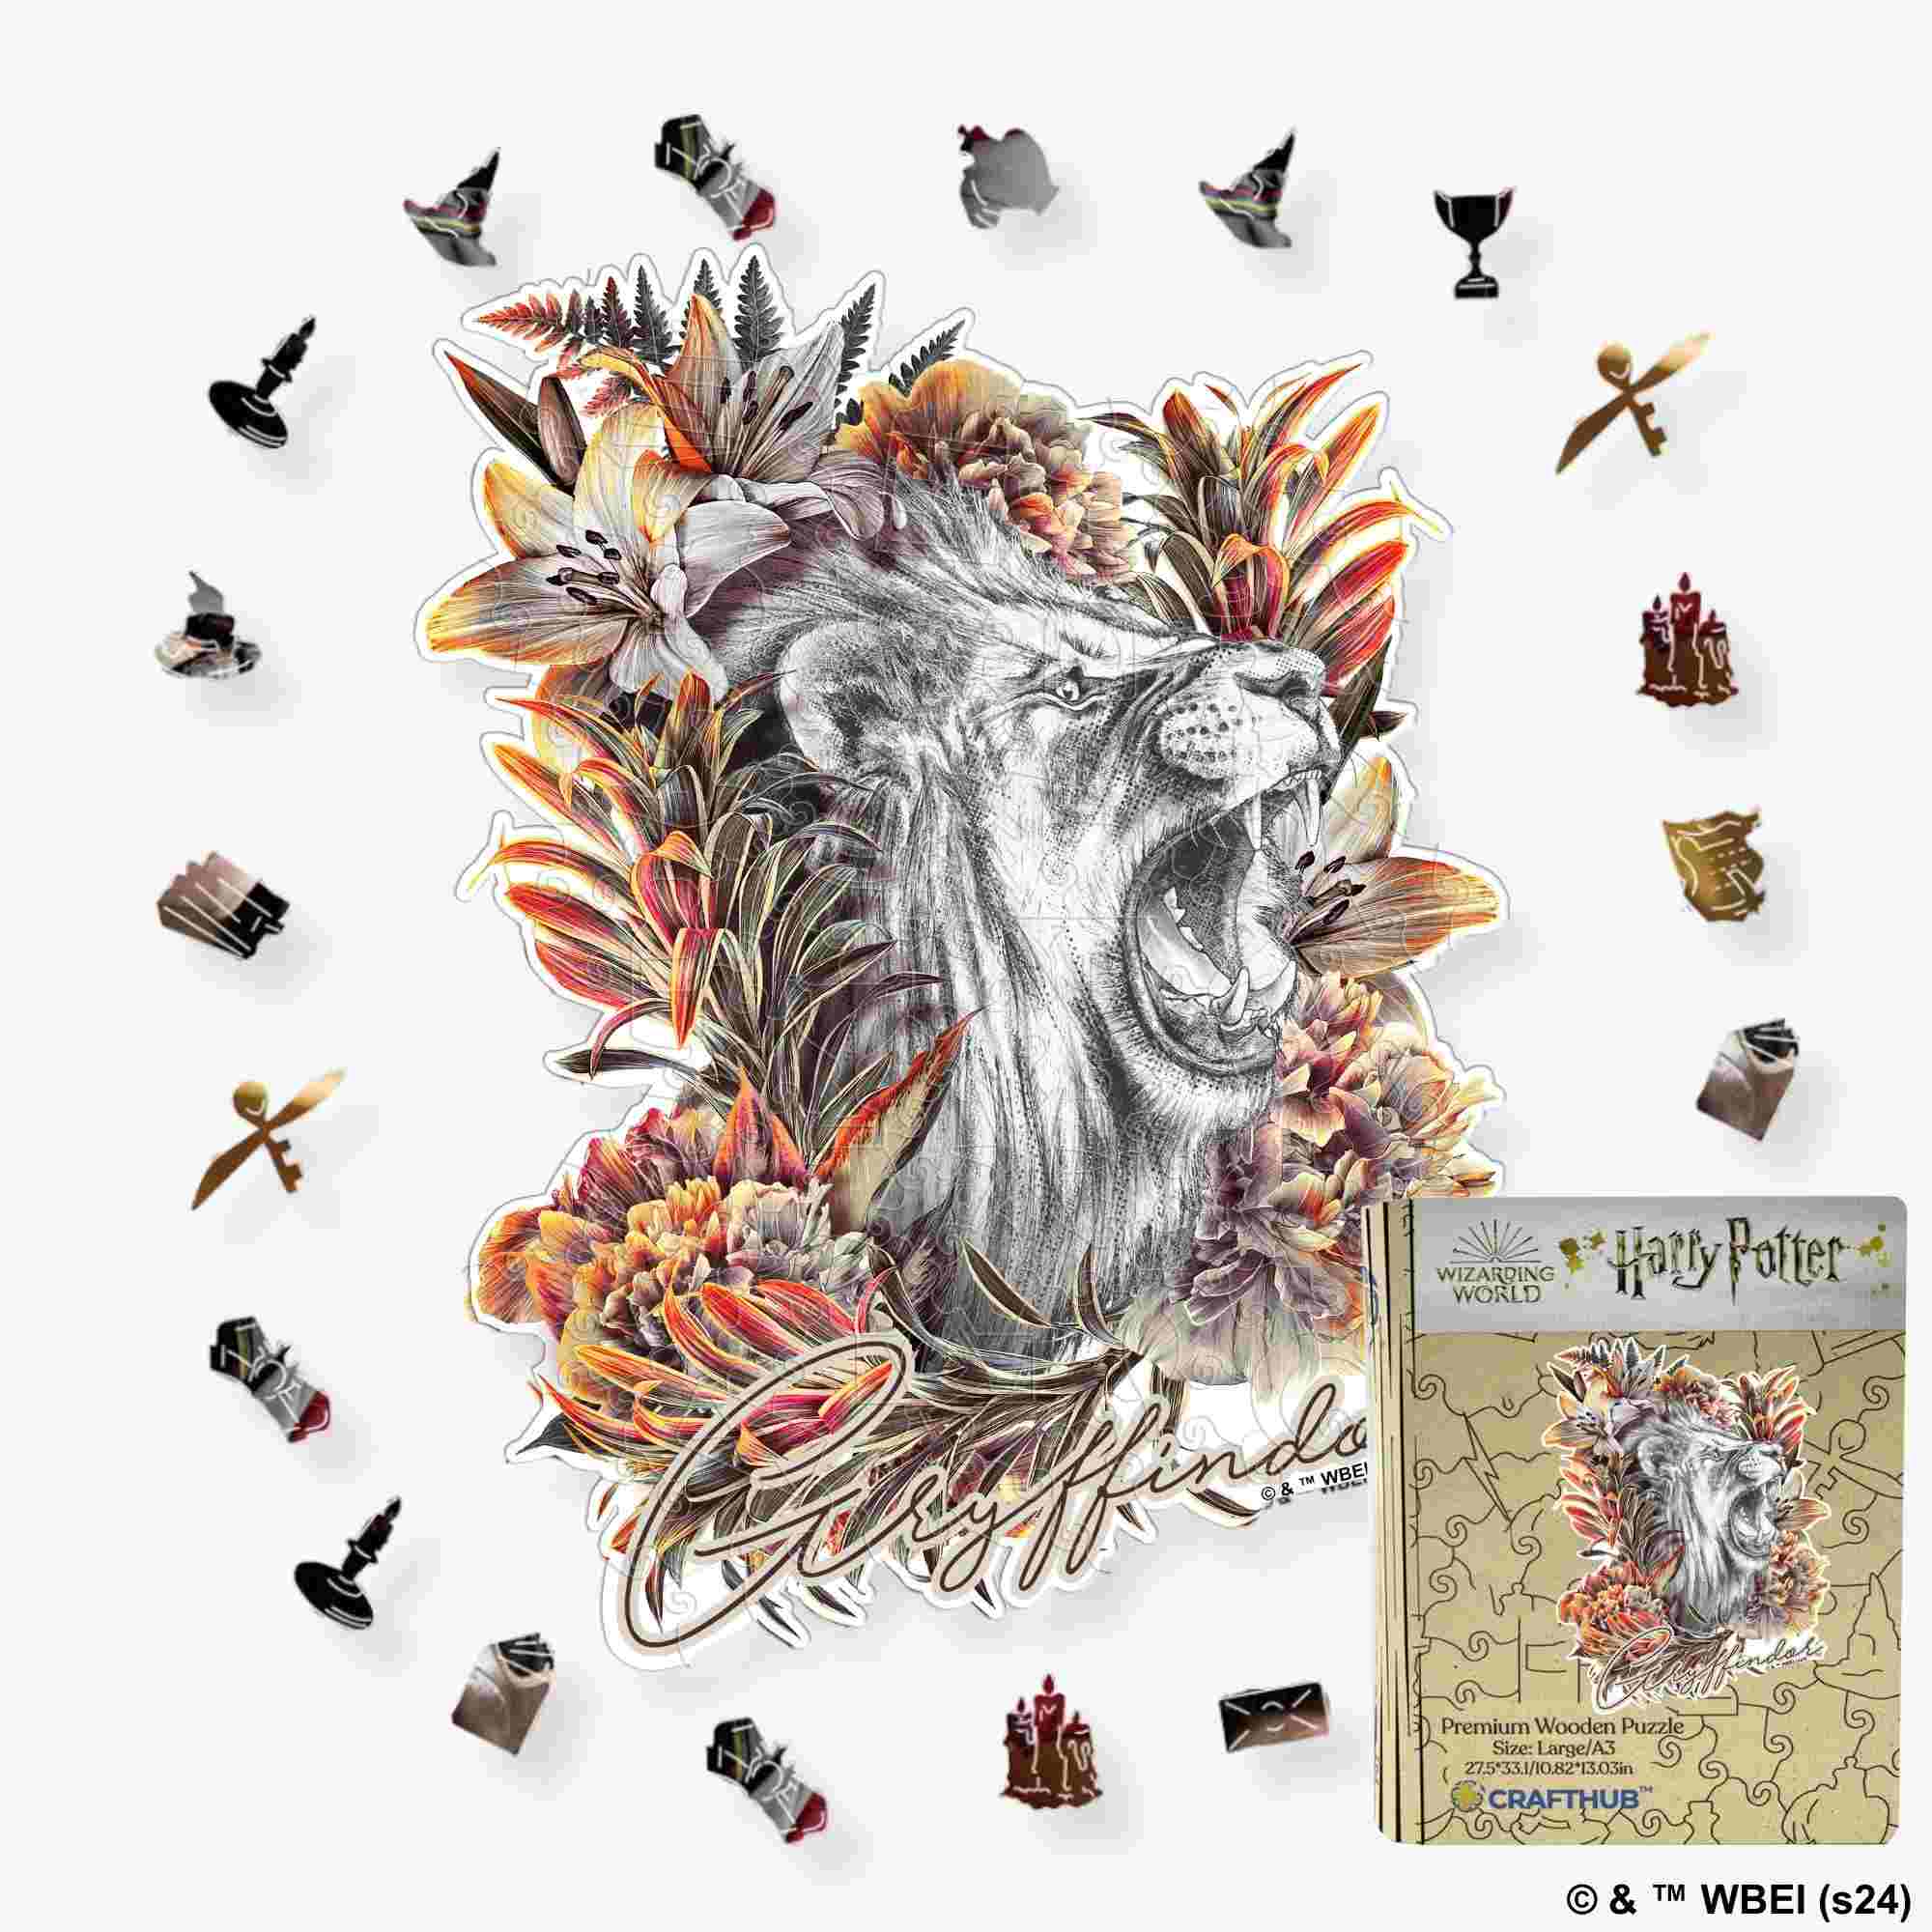 Animal Jigsaw Puzzle > Wooden Jigsaw Puzzle > Jigsaw Puzzle A3 Magical Gryffindor - Utilitarian Romance Crest Wooden Jigsaw Puzzle